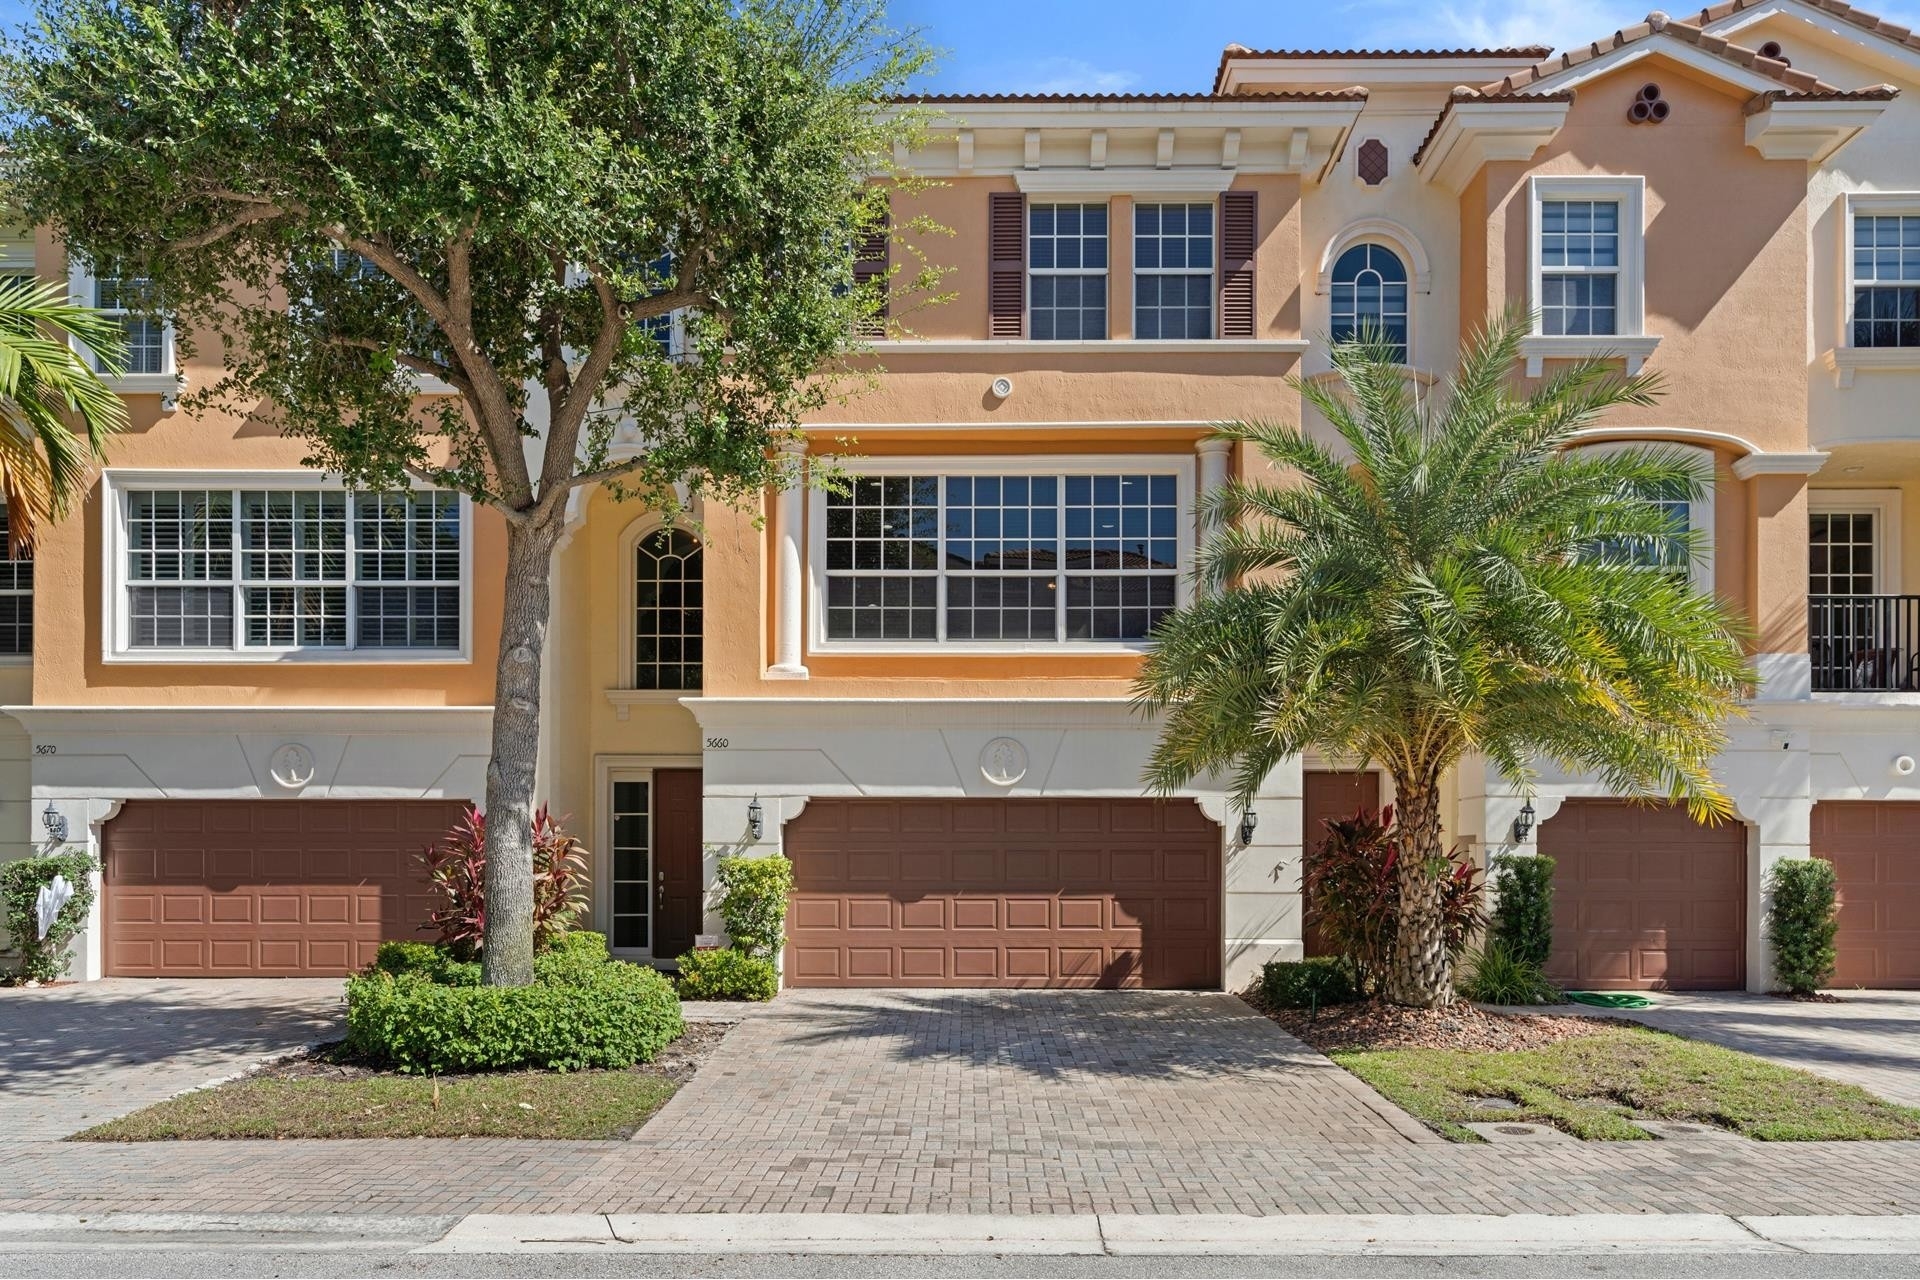 2. Single Family Townhouse for Sale at Delray Manors, Boca Raton, FL 33487